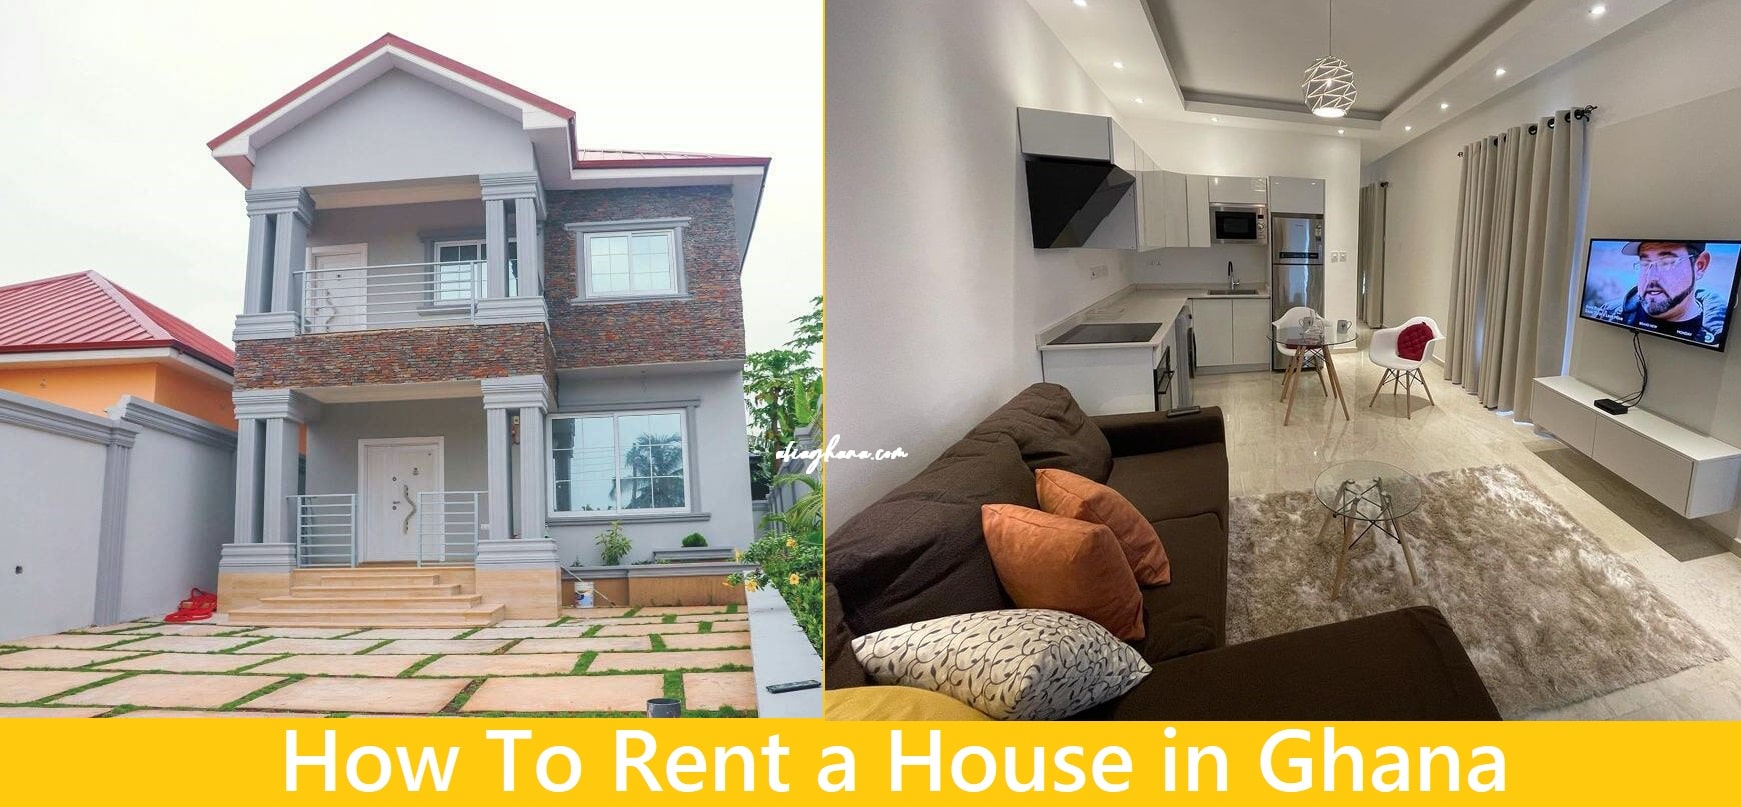 How To Rent A House In Ghana | Cost of Living in Ghana 1